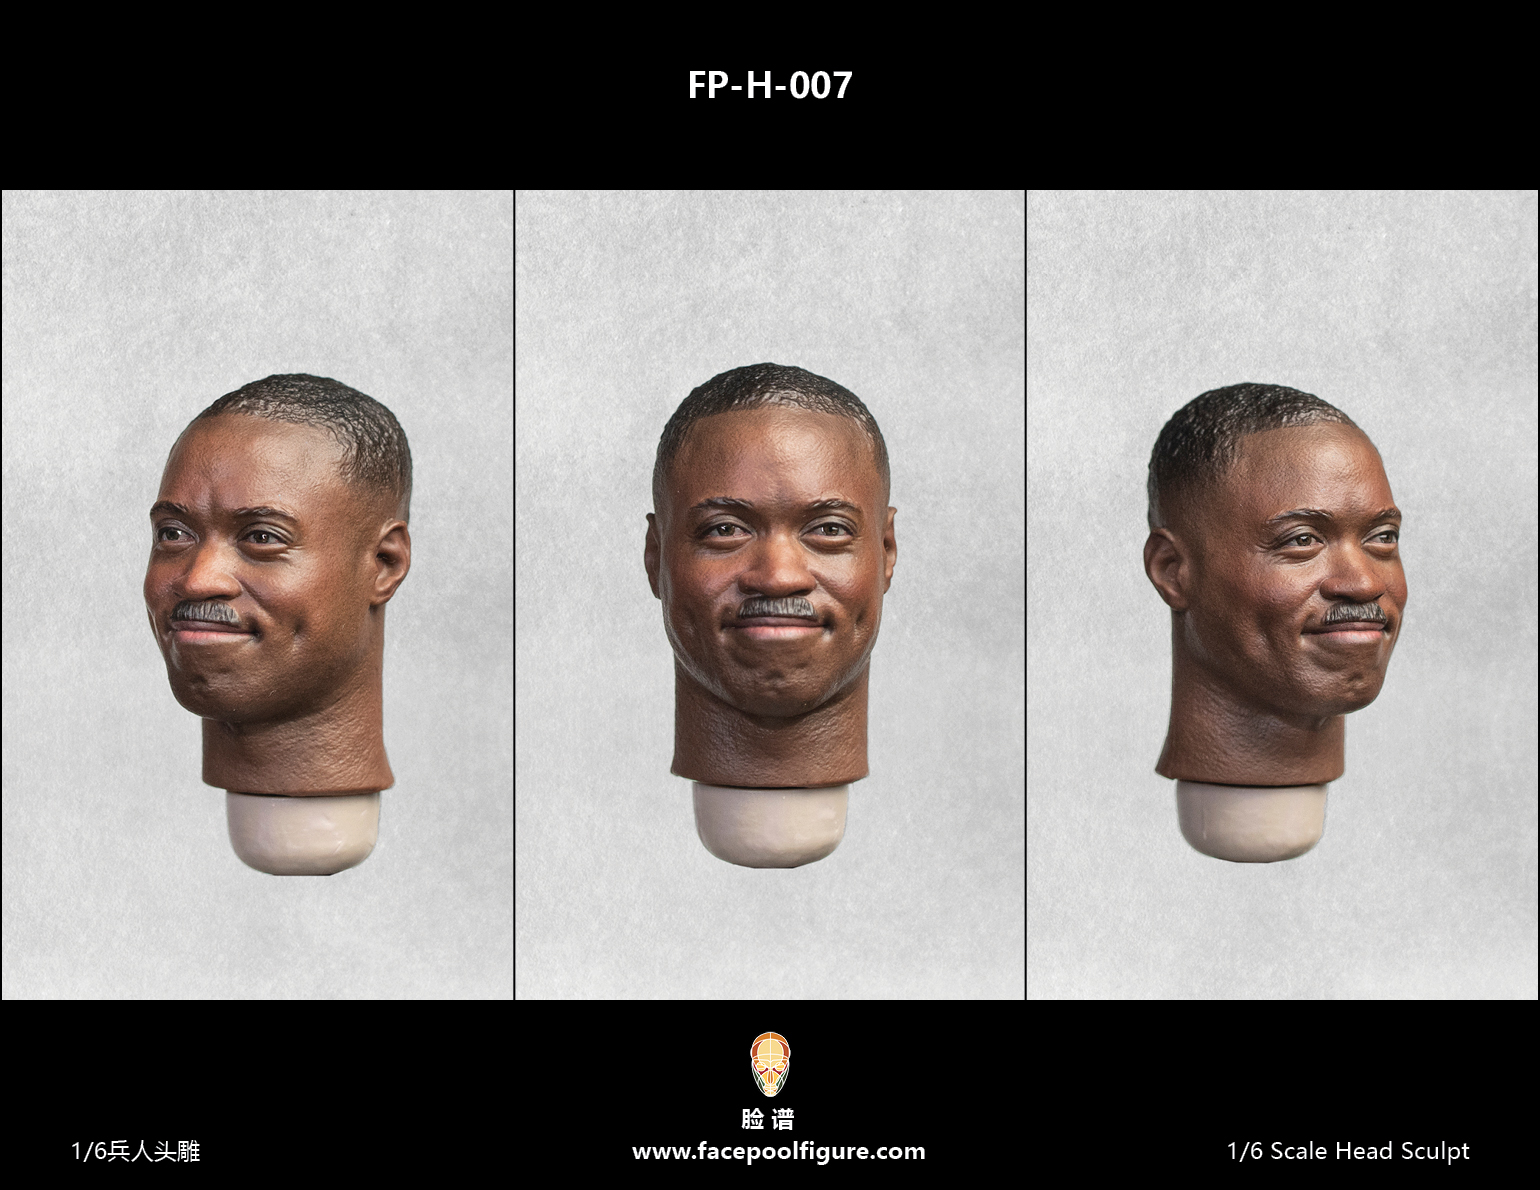 FacepoolFigure 1/6 Black Male Head Sculpt with Expression FP-H-007 –  Facepoolfigure Online Store